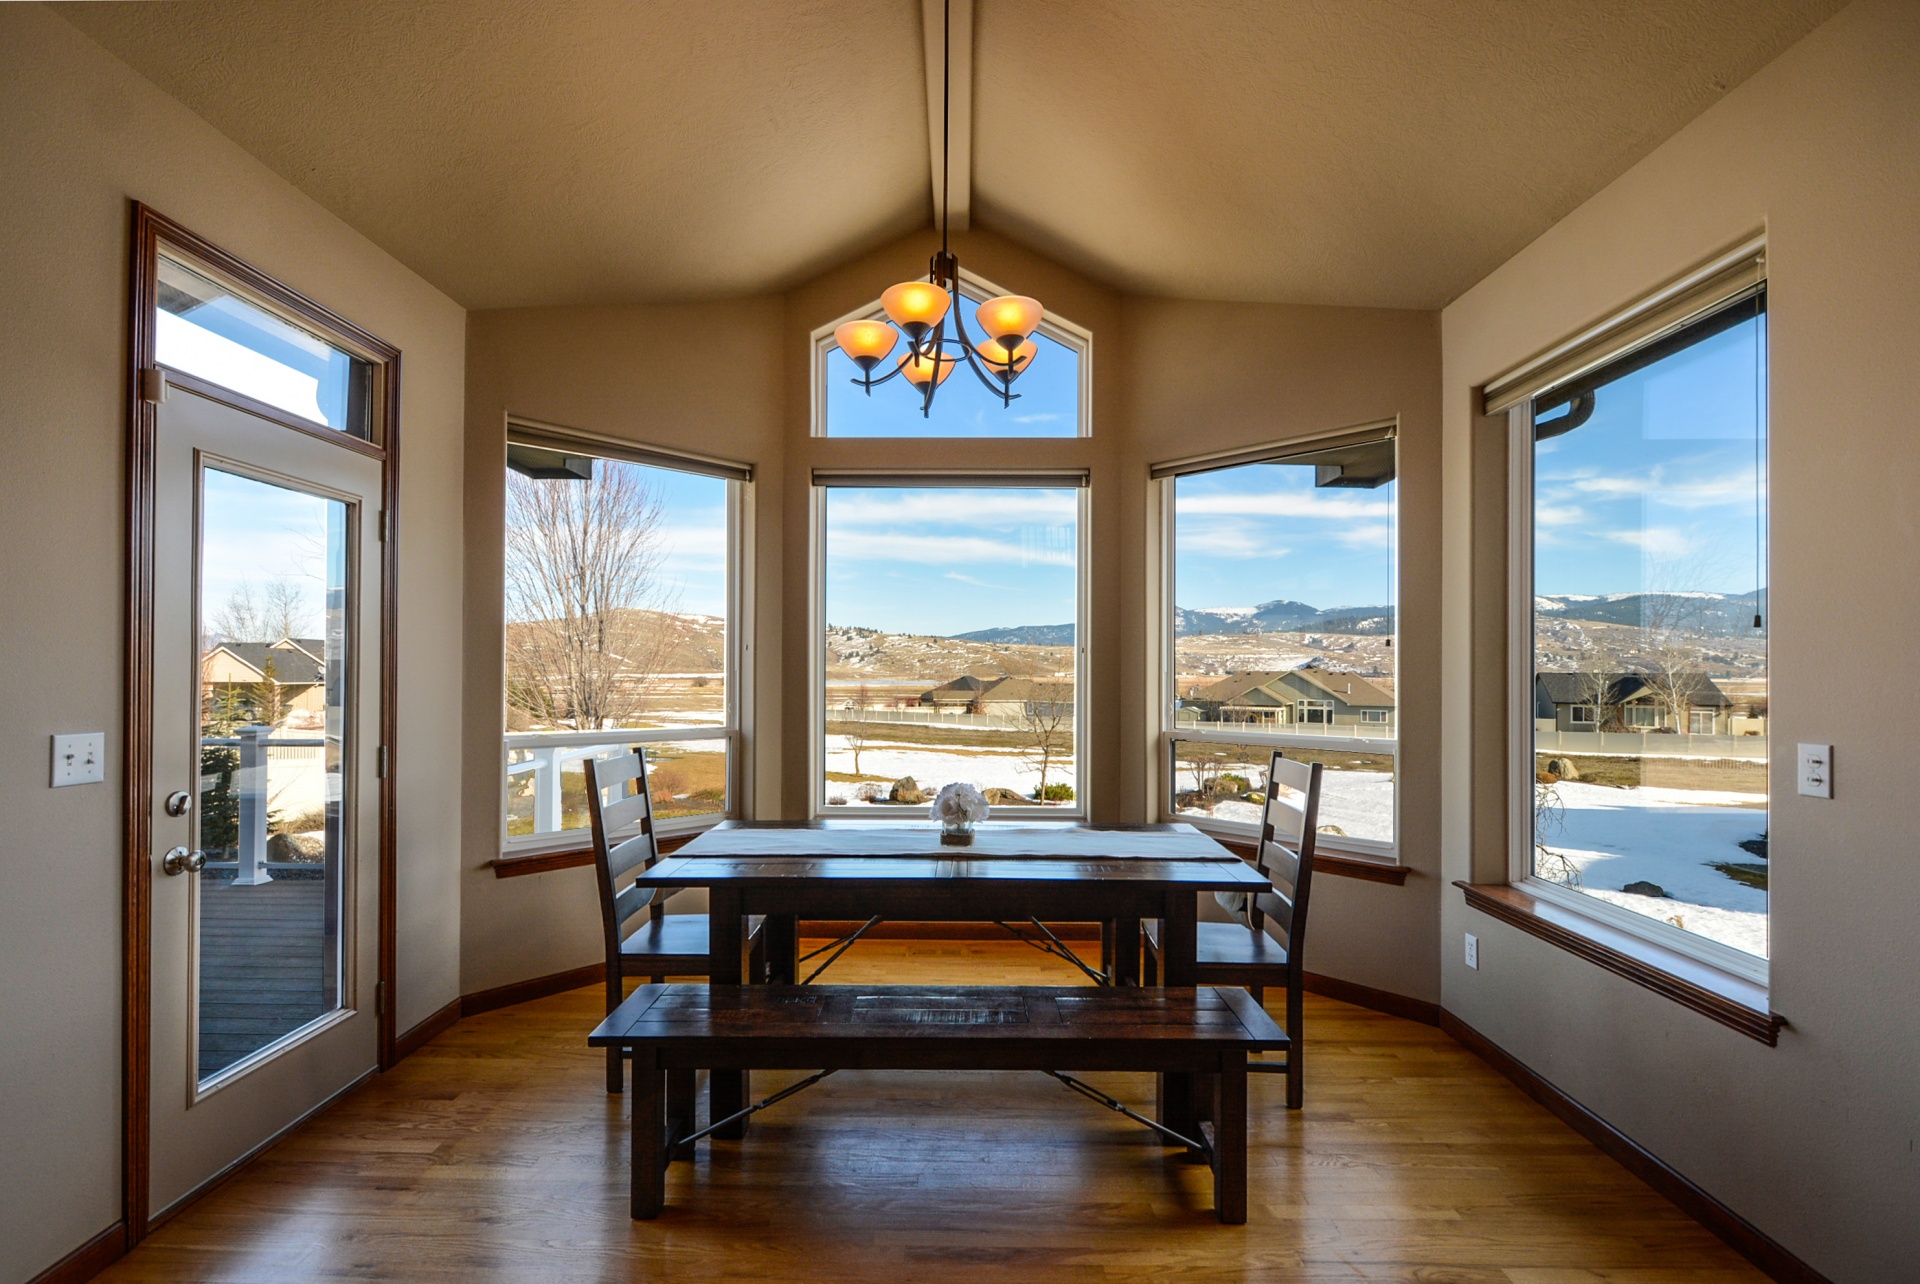 Dining room with windows looking at mountains